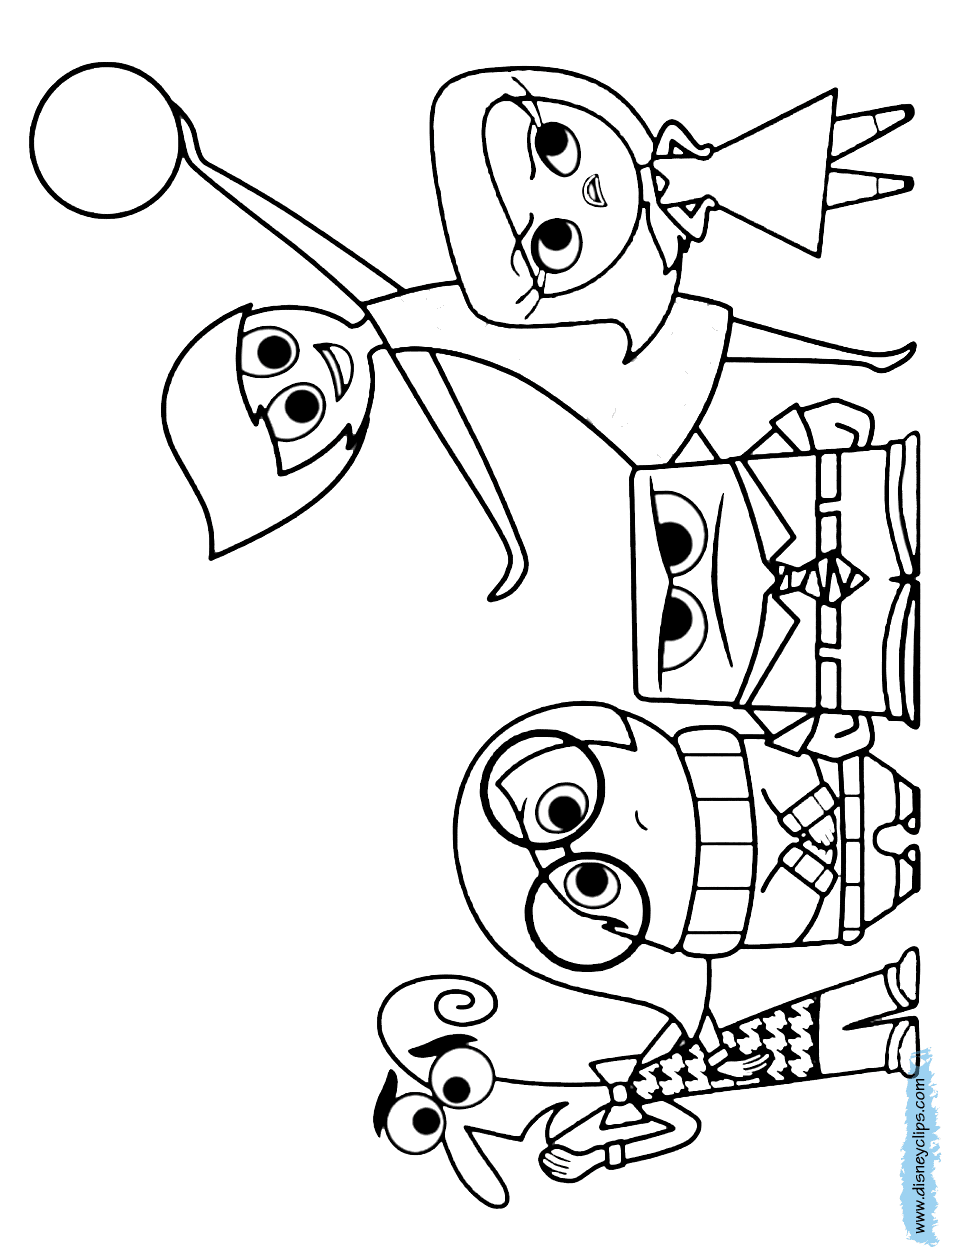 inside out coloring pages all characters disney pixar inside out coloring pages disney coloring book characters inside out all pages coloring 